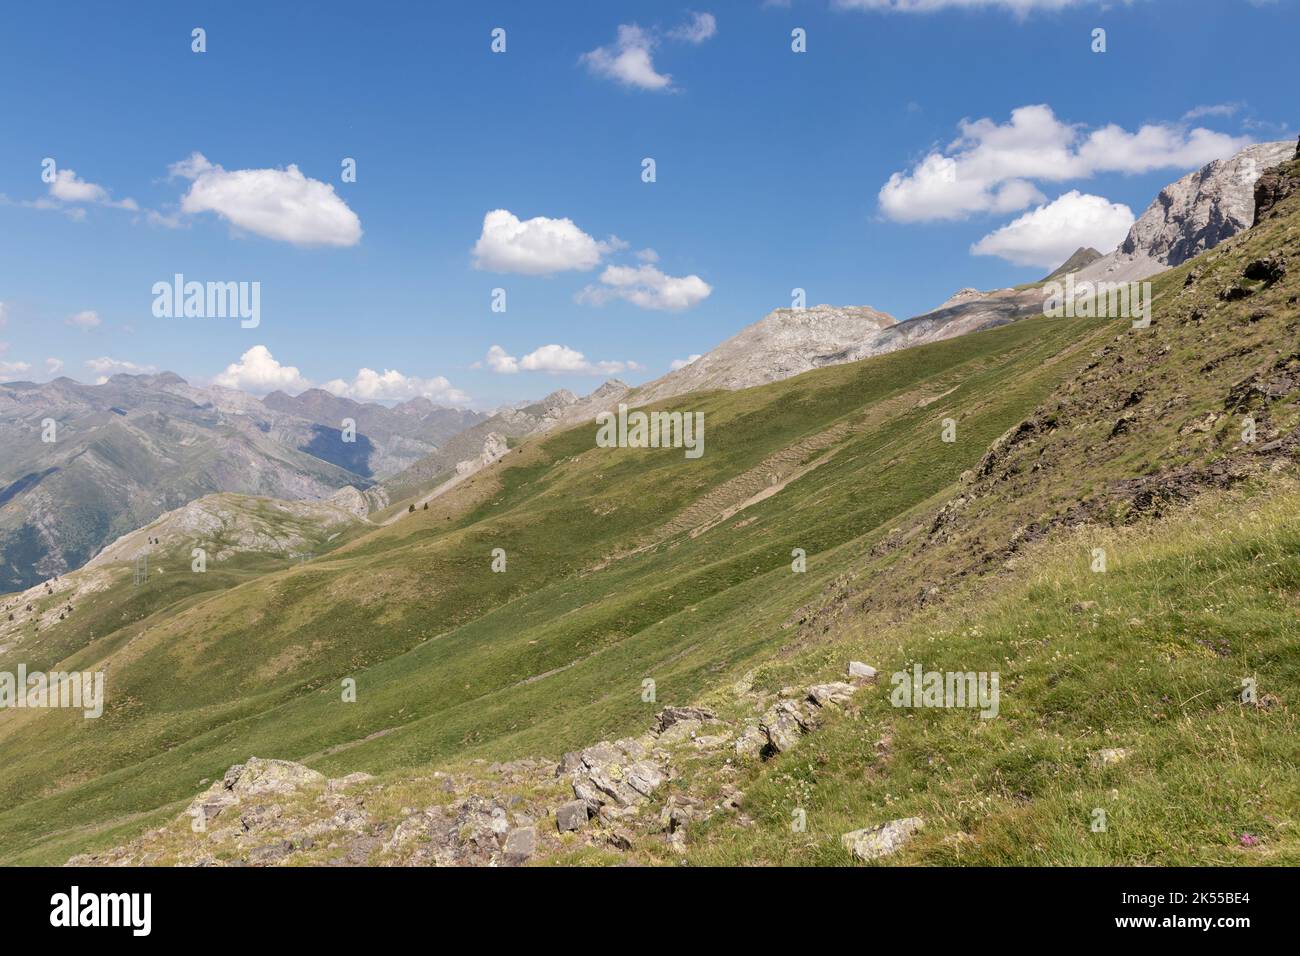 Picturesque view of the Pyrenees landscape with green meadows and mountains during the day. Summer trip in the mountains Stock Photo